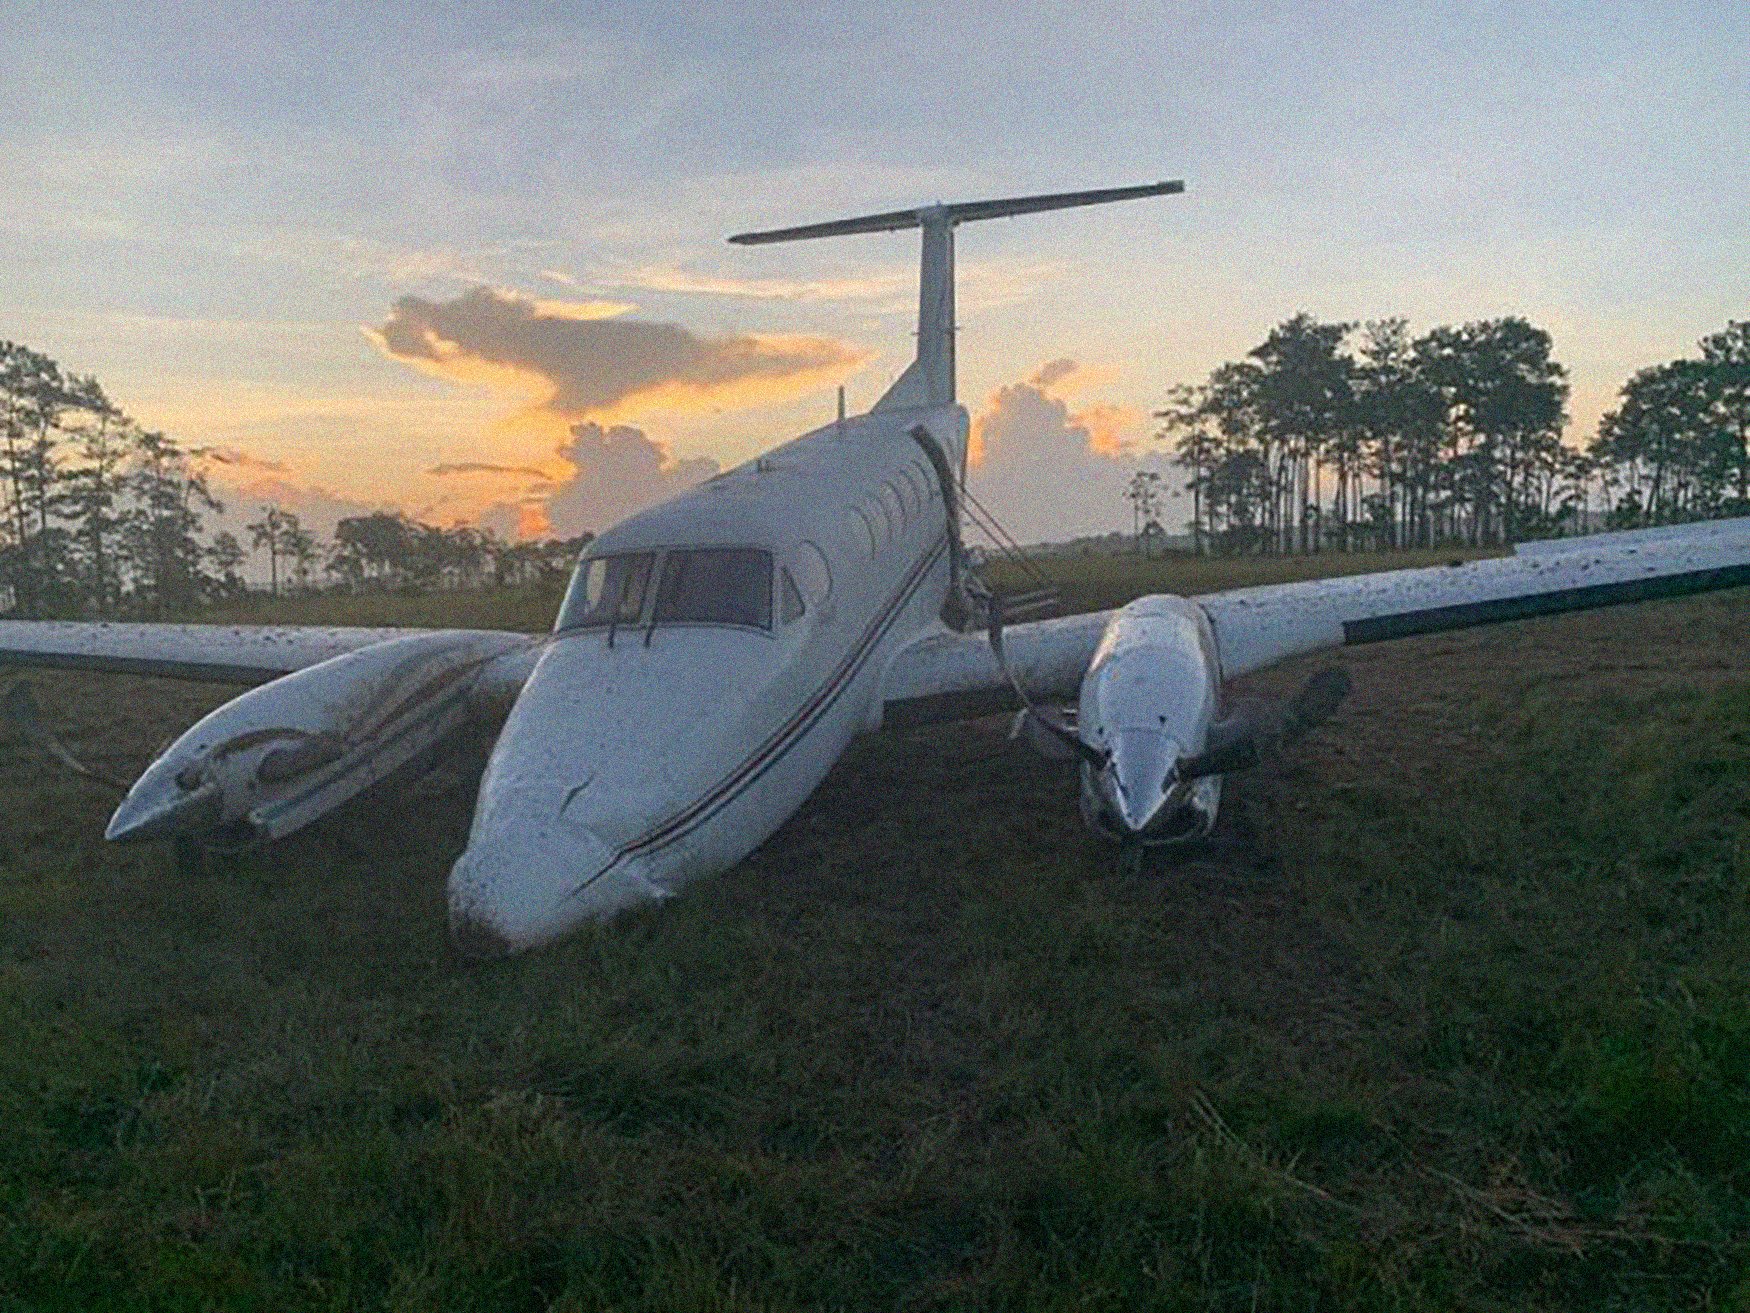  A picture taken by Honduras Special Forces of a Cessna 340 loaded with more than 100kg of cocaine landed near Brus Laguna on 30 March, 2021. Security forces engaged in a firefight with two plane pilots before sizing the shipment.  